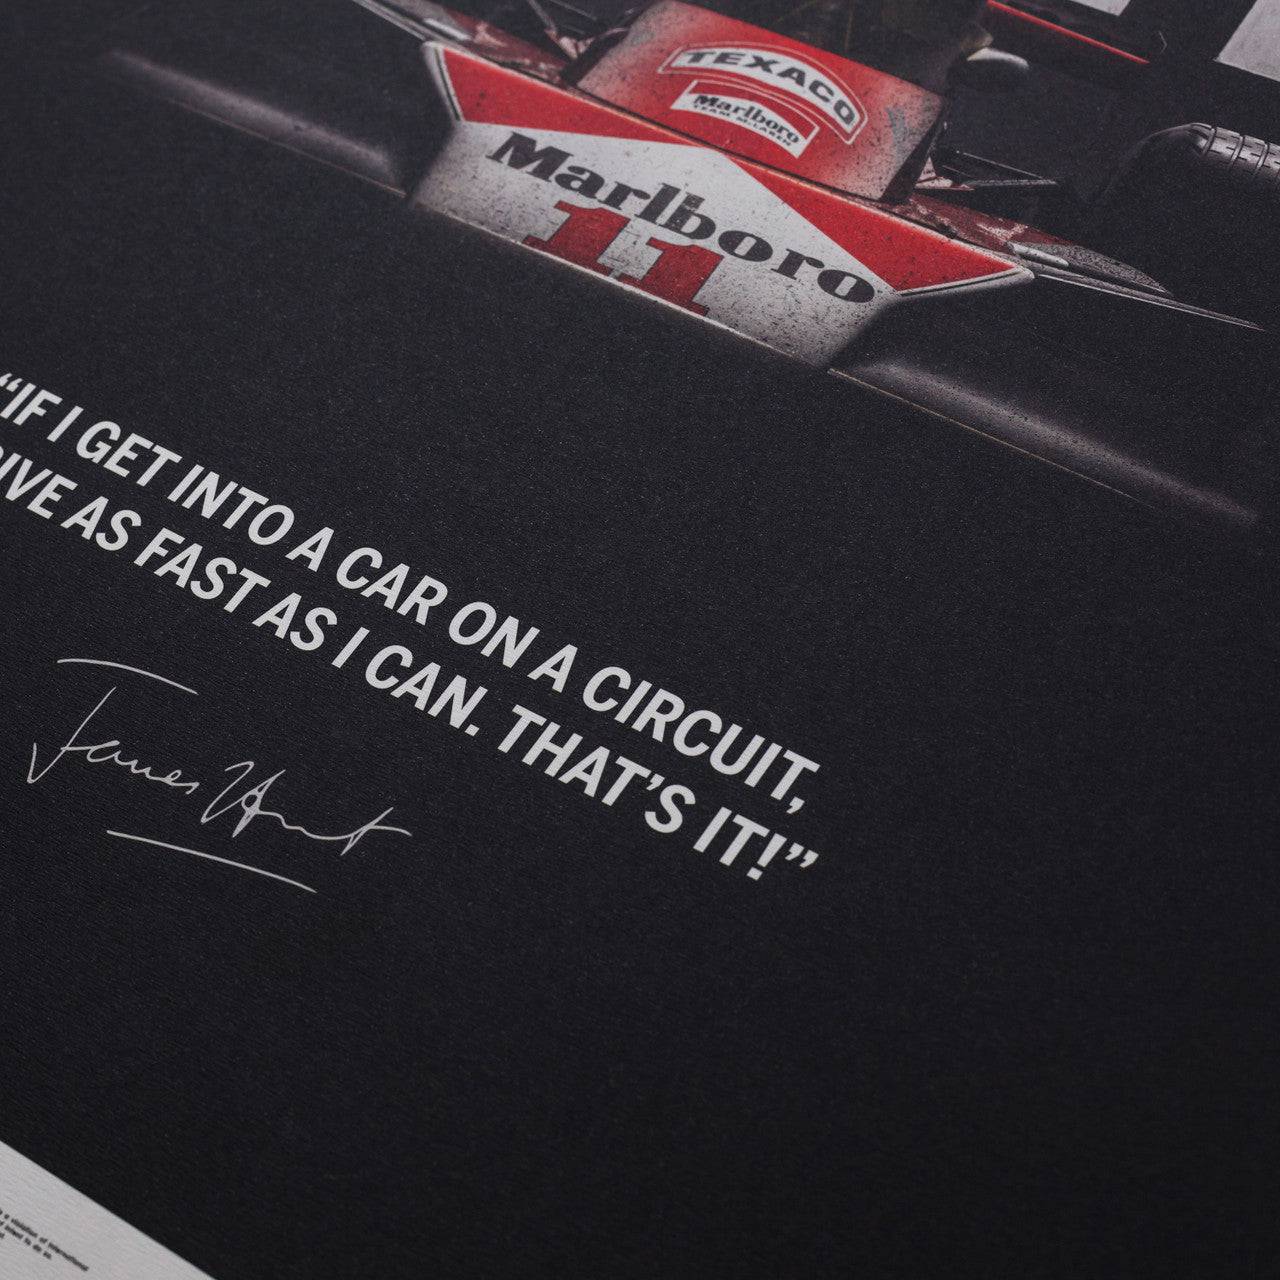 McLaren M23 - James Hunt - Quote - Japanese GP - 1976 - Limited Poster